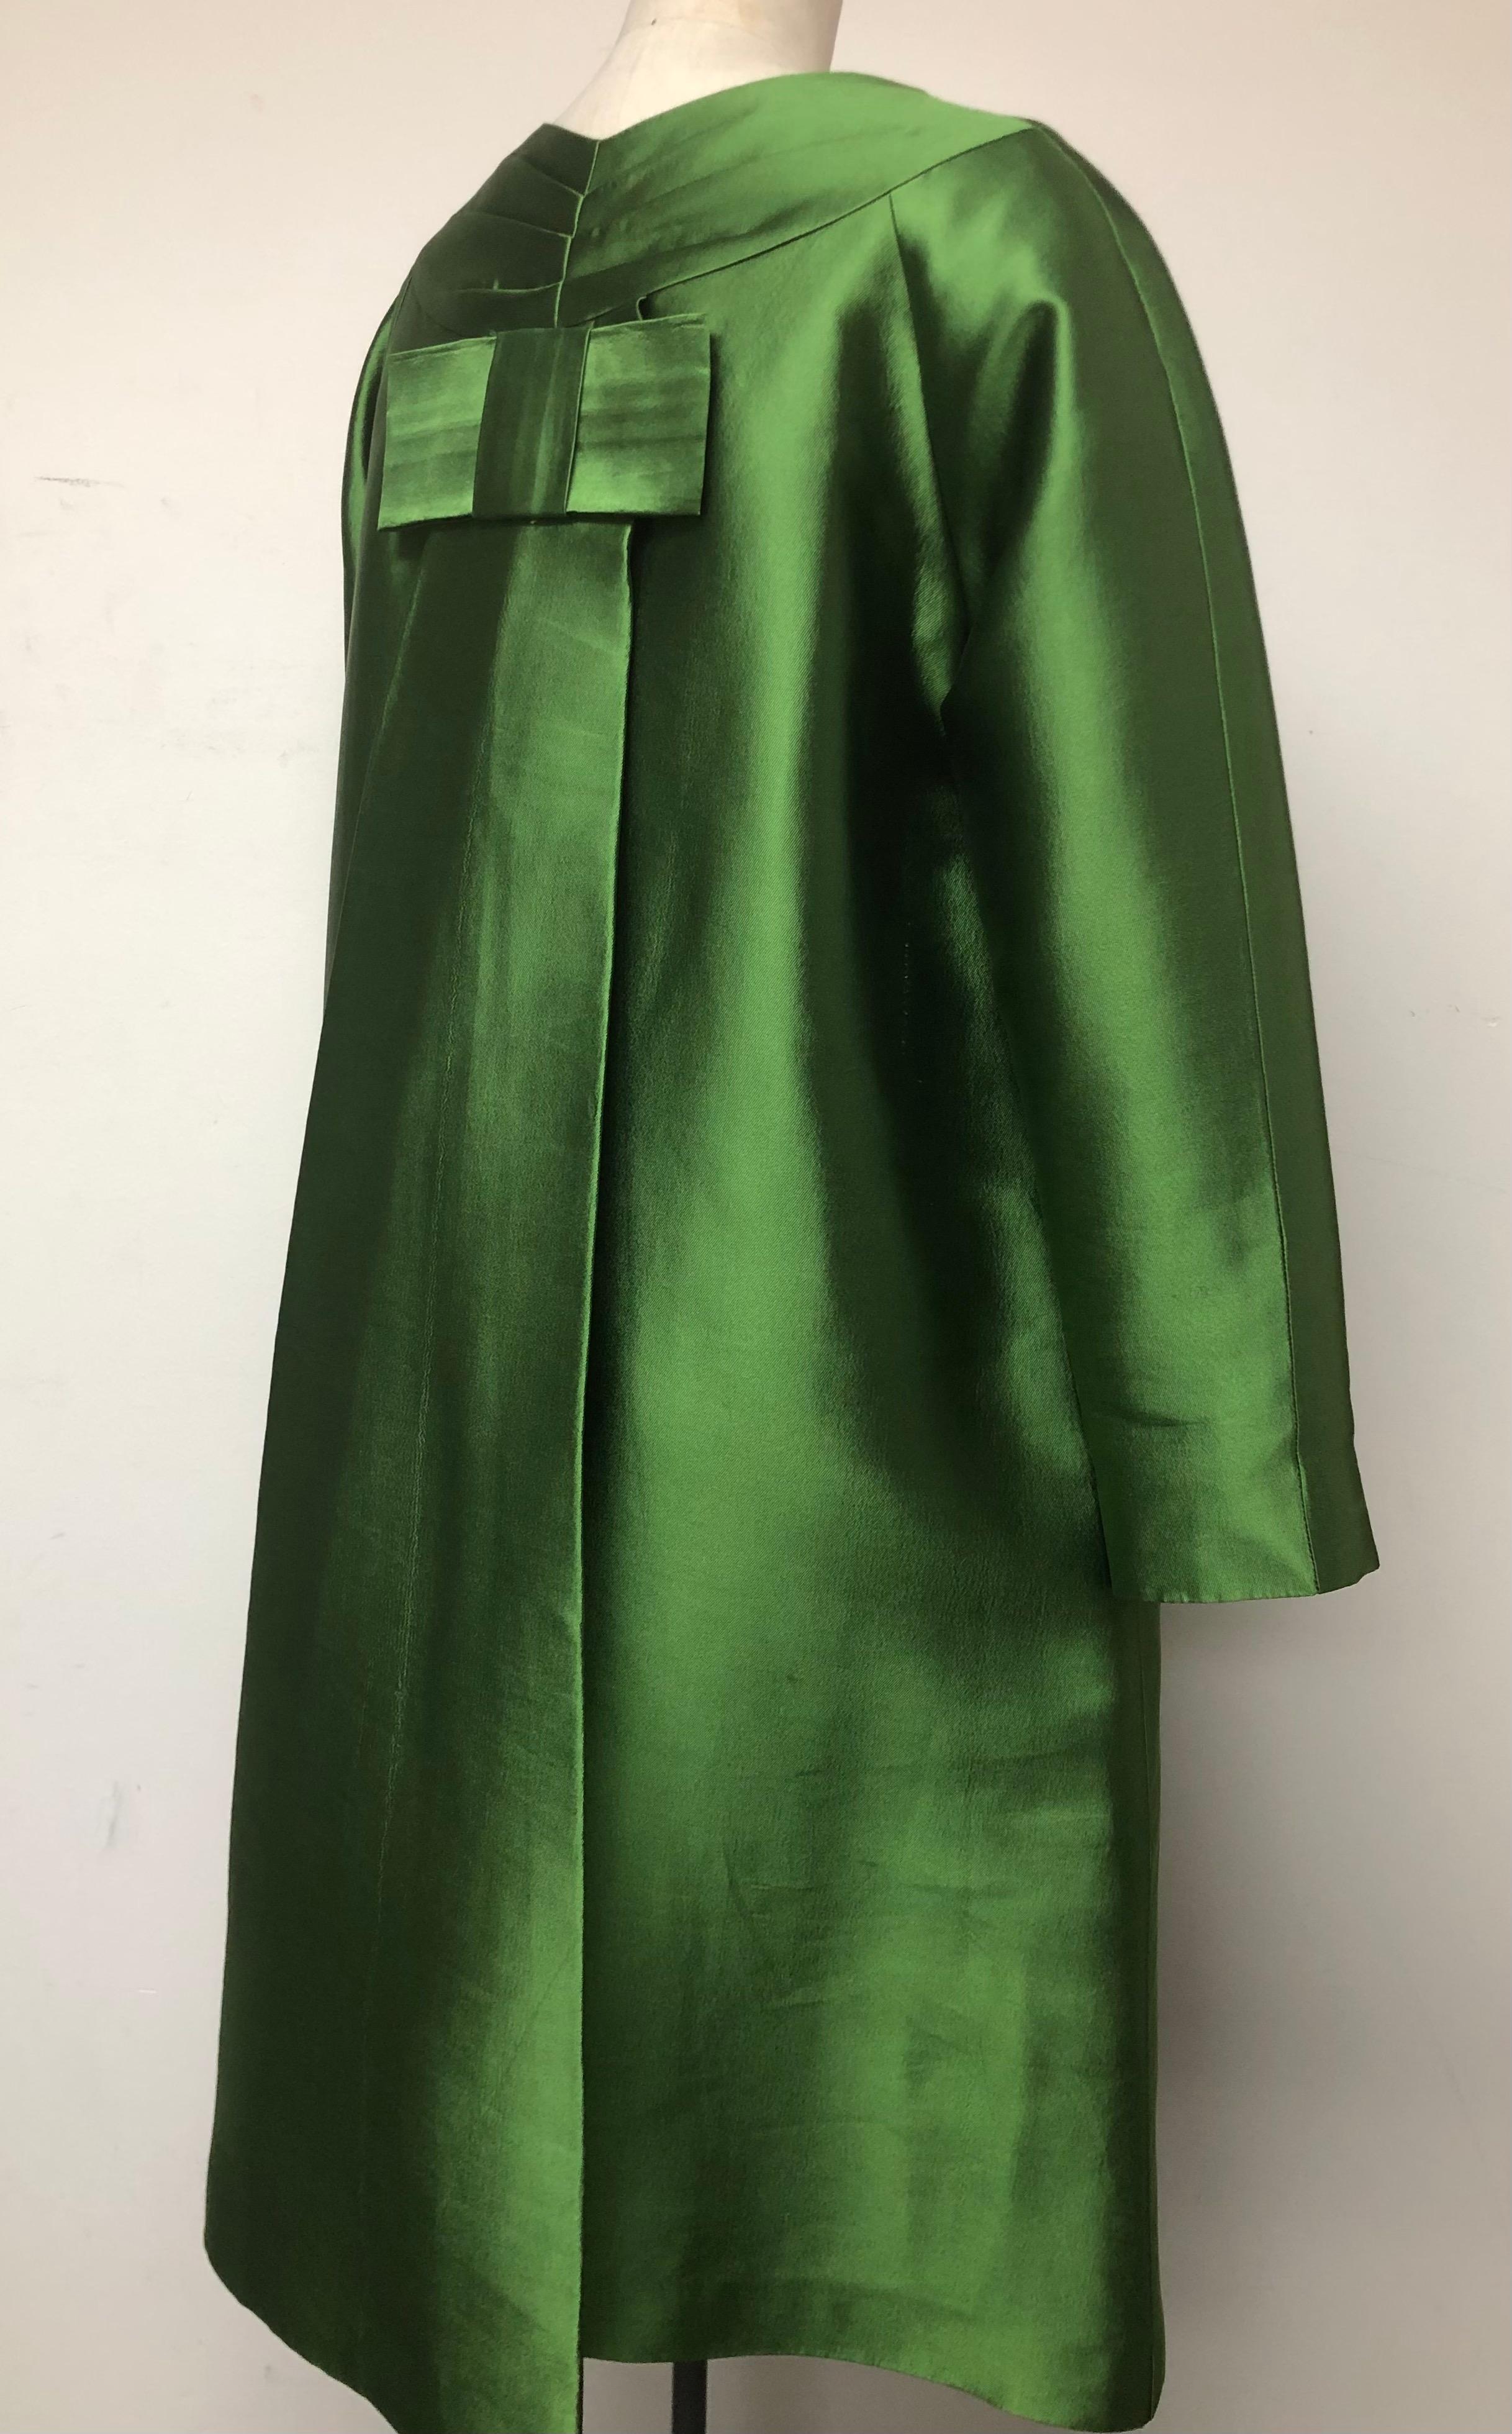  Vibrant Emerald Silk Opera Coat with Pleat Back and Charming Bow  2